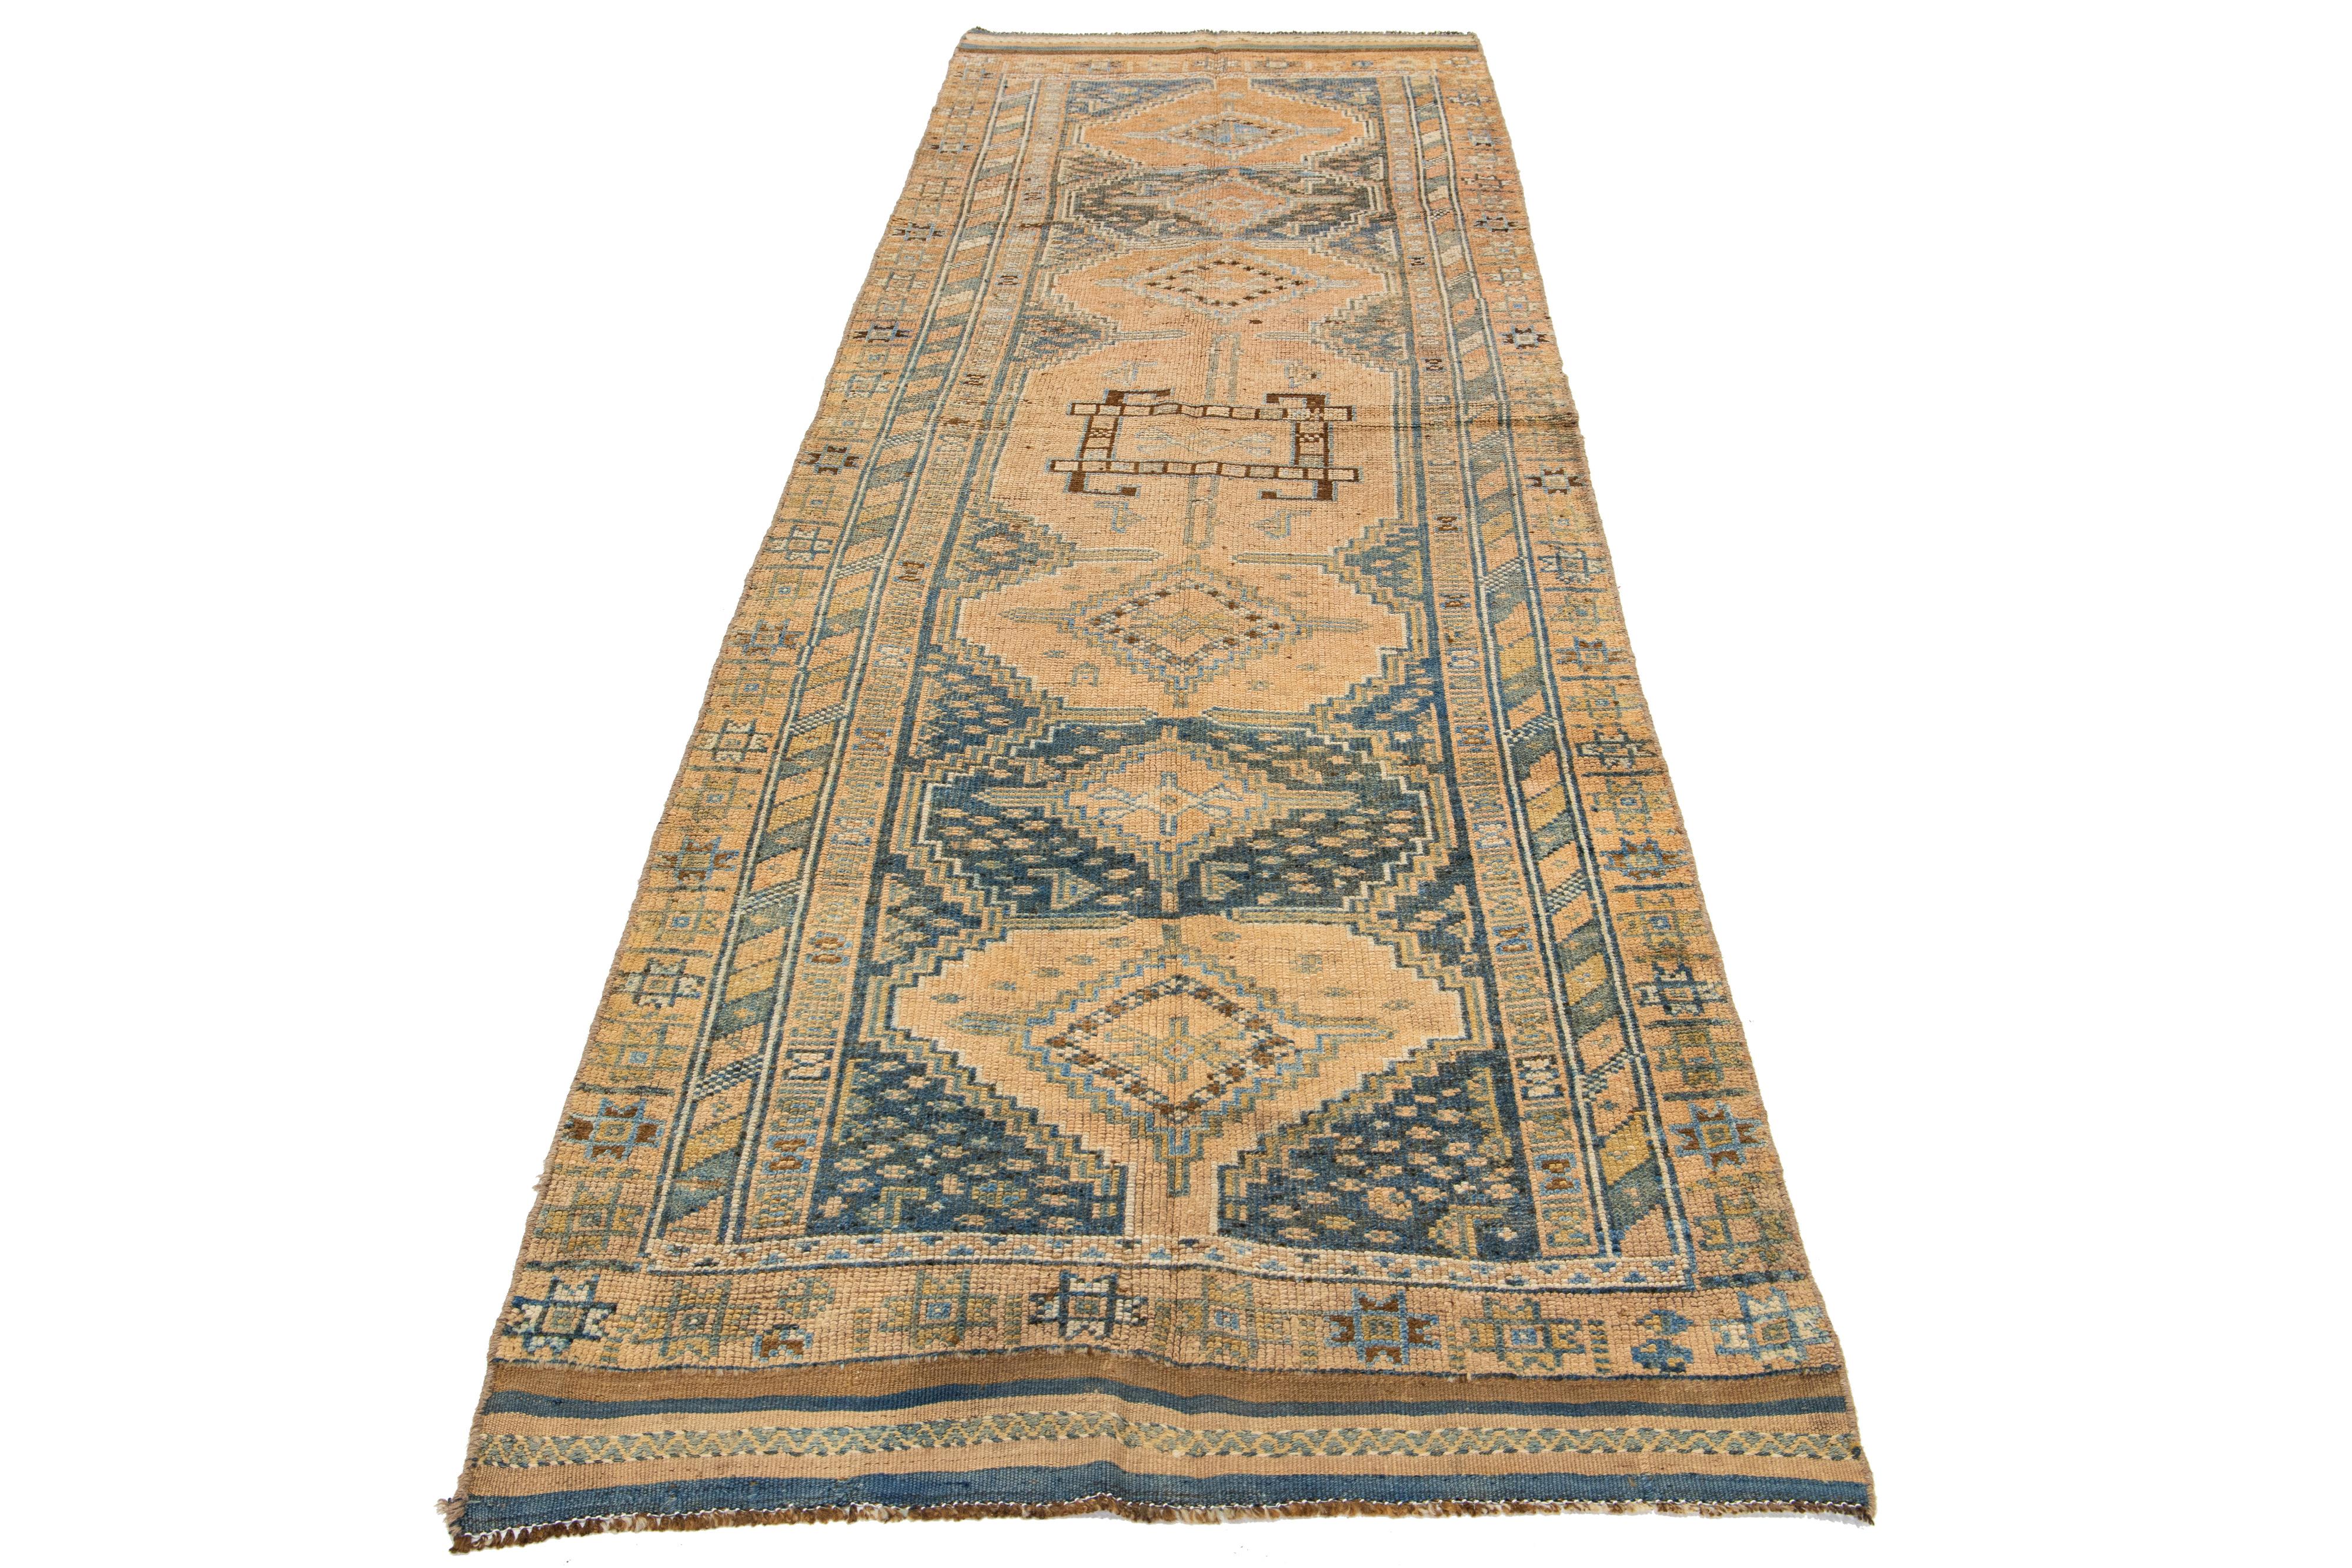 This beautiful 20th-century Heriz hand-knotted wool runner has a tan-colored field. The piece features stunning blue and brown accents in a gorgeous tribal design.

This rug measures 3'6